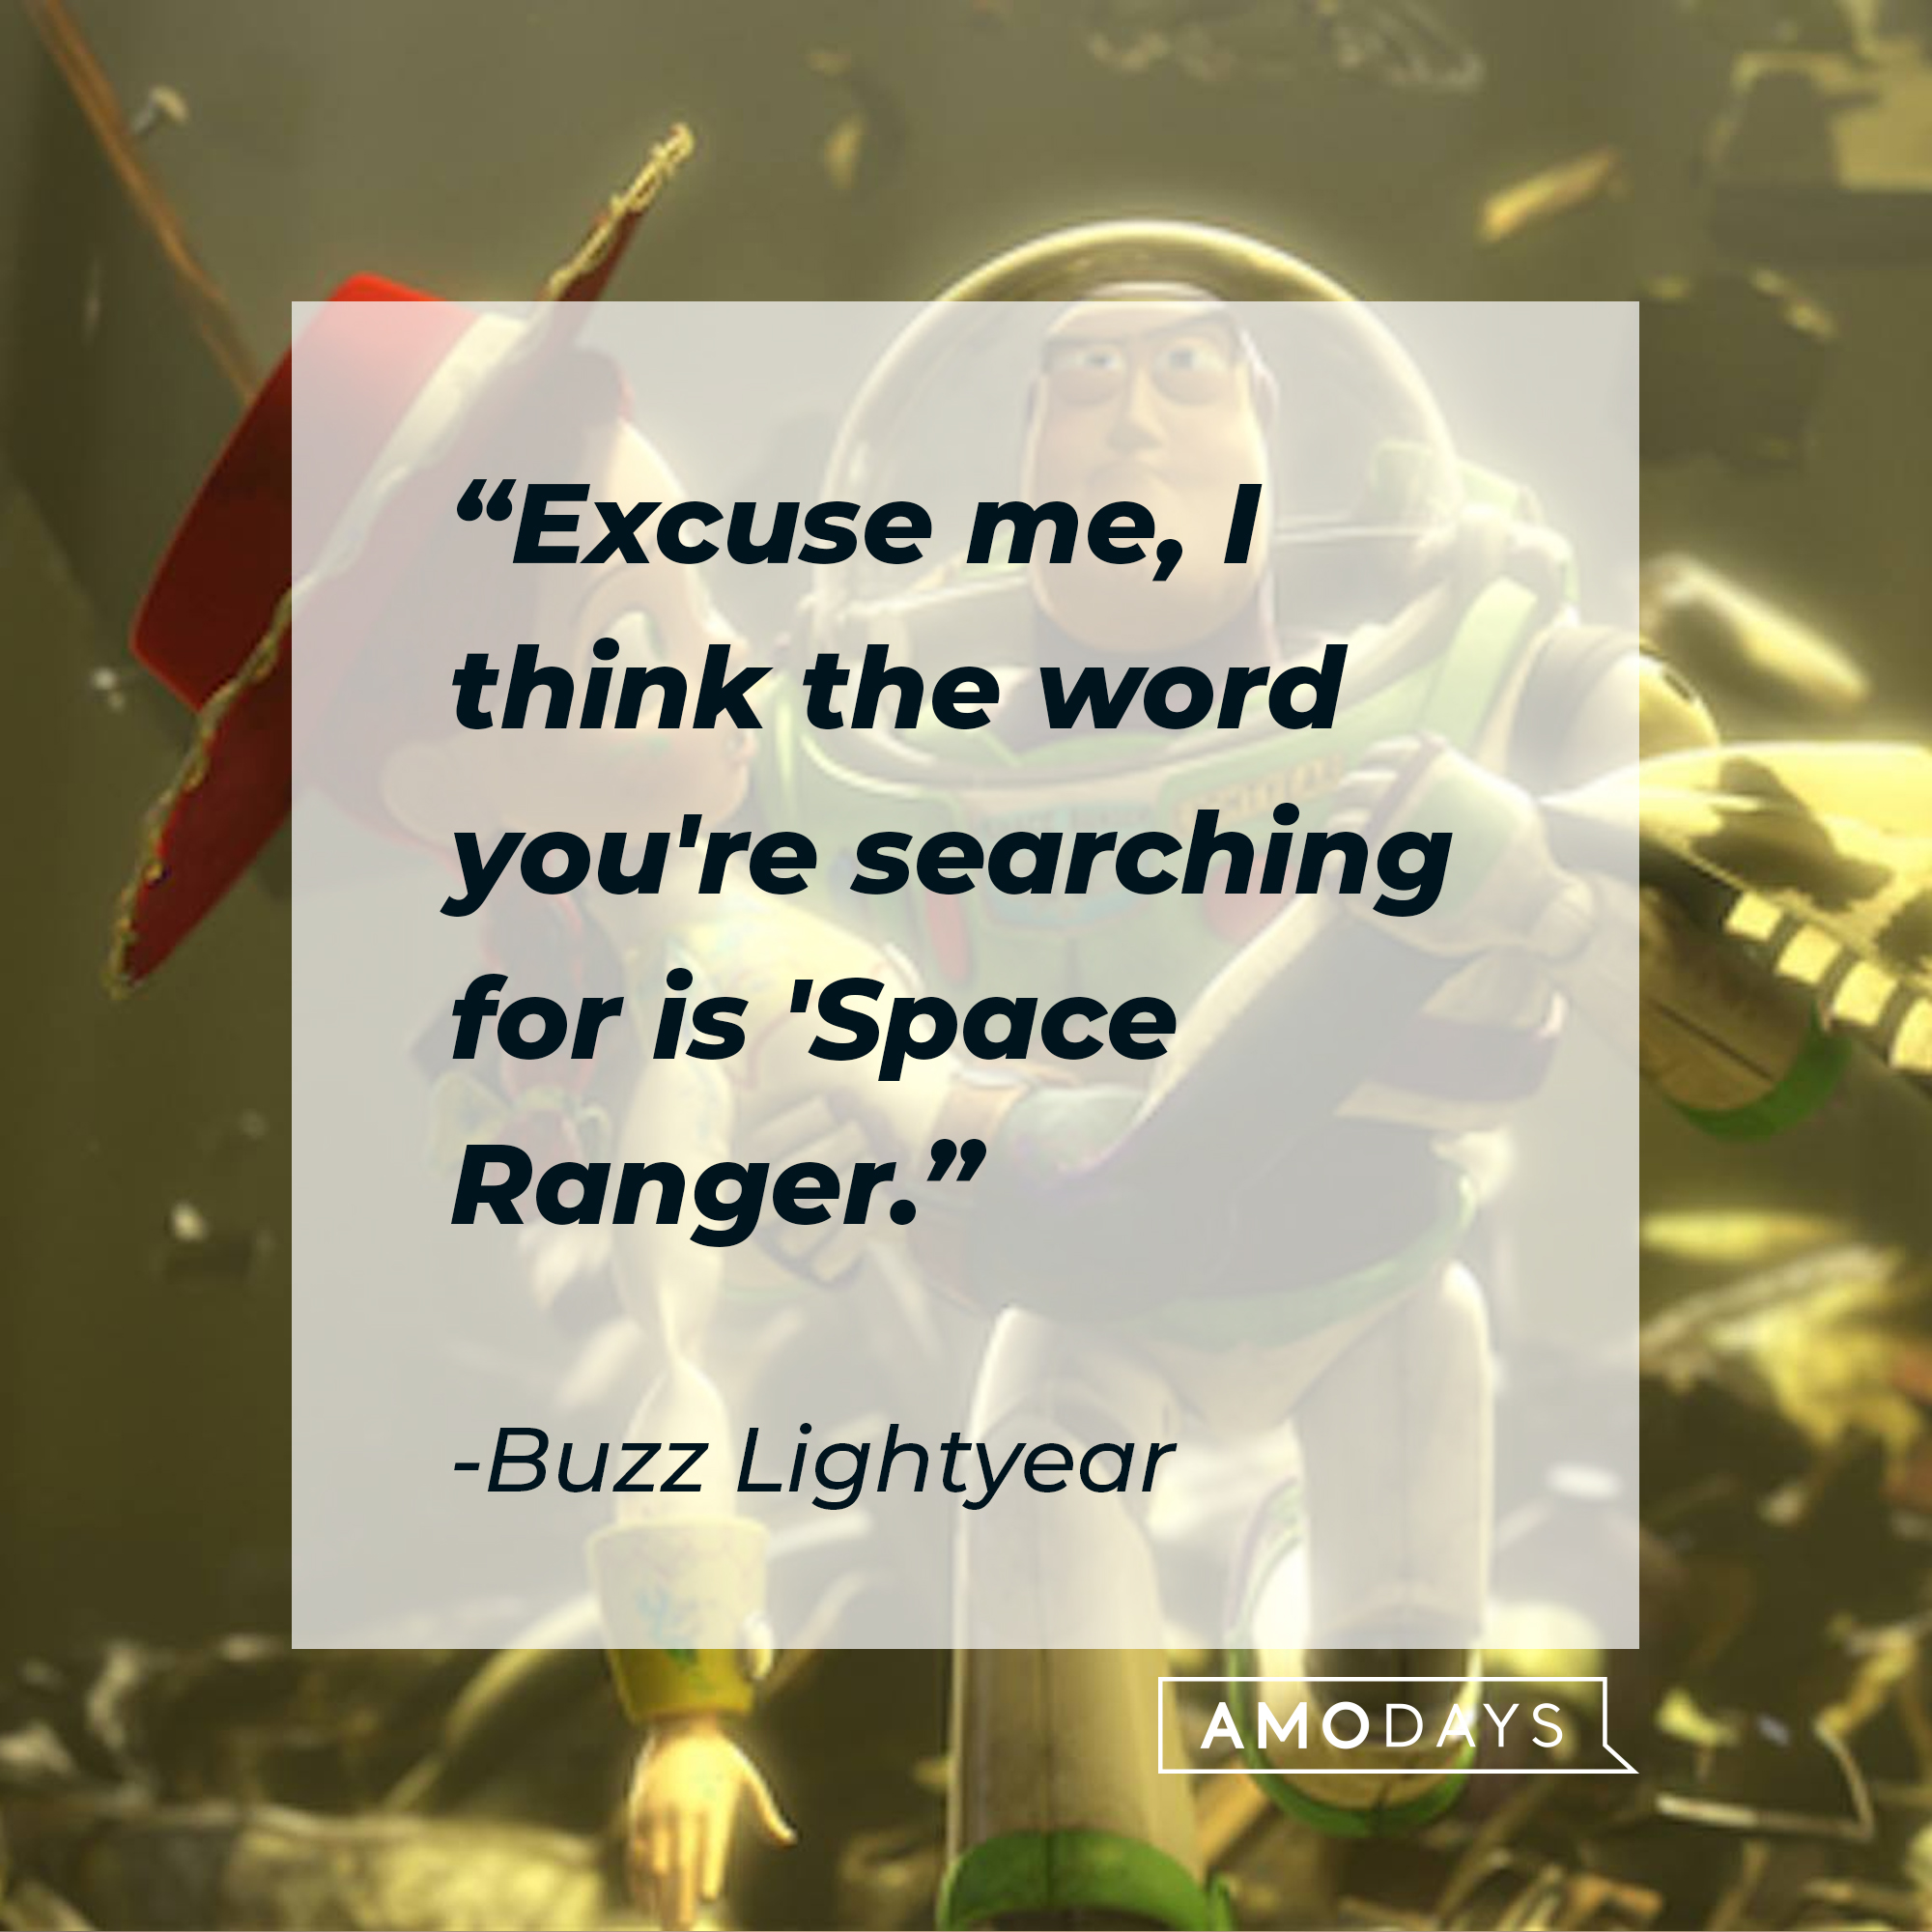 Buzz Lightyear's quote: "Excuse me, I think the word you're searching for is 'Space Ranger.” | Source: Facebook/BuzzLightyear